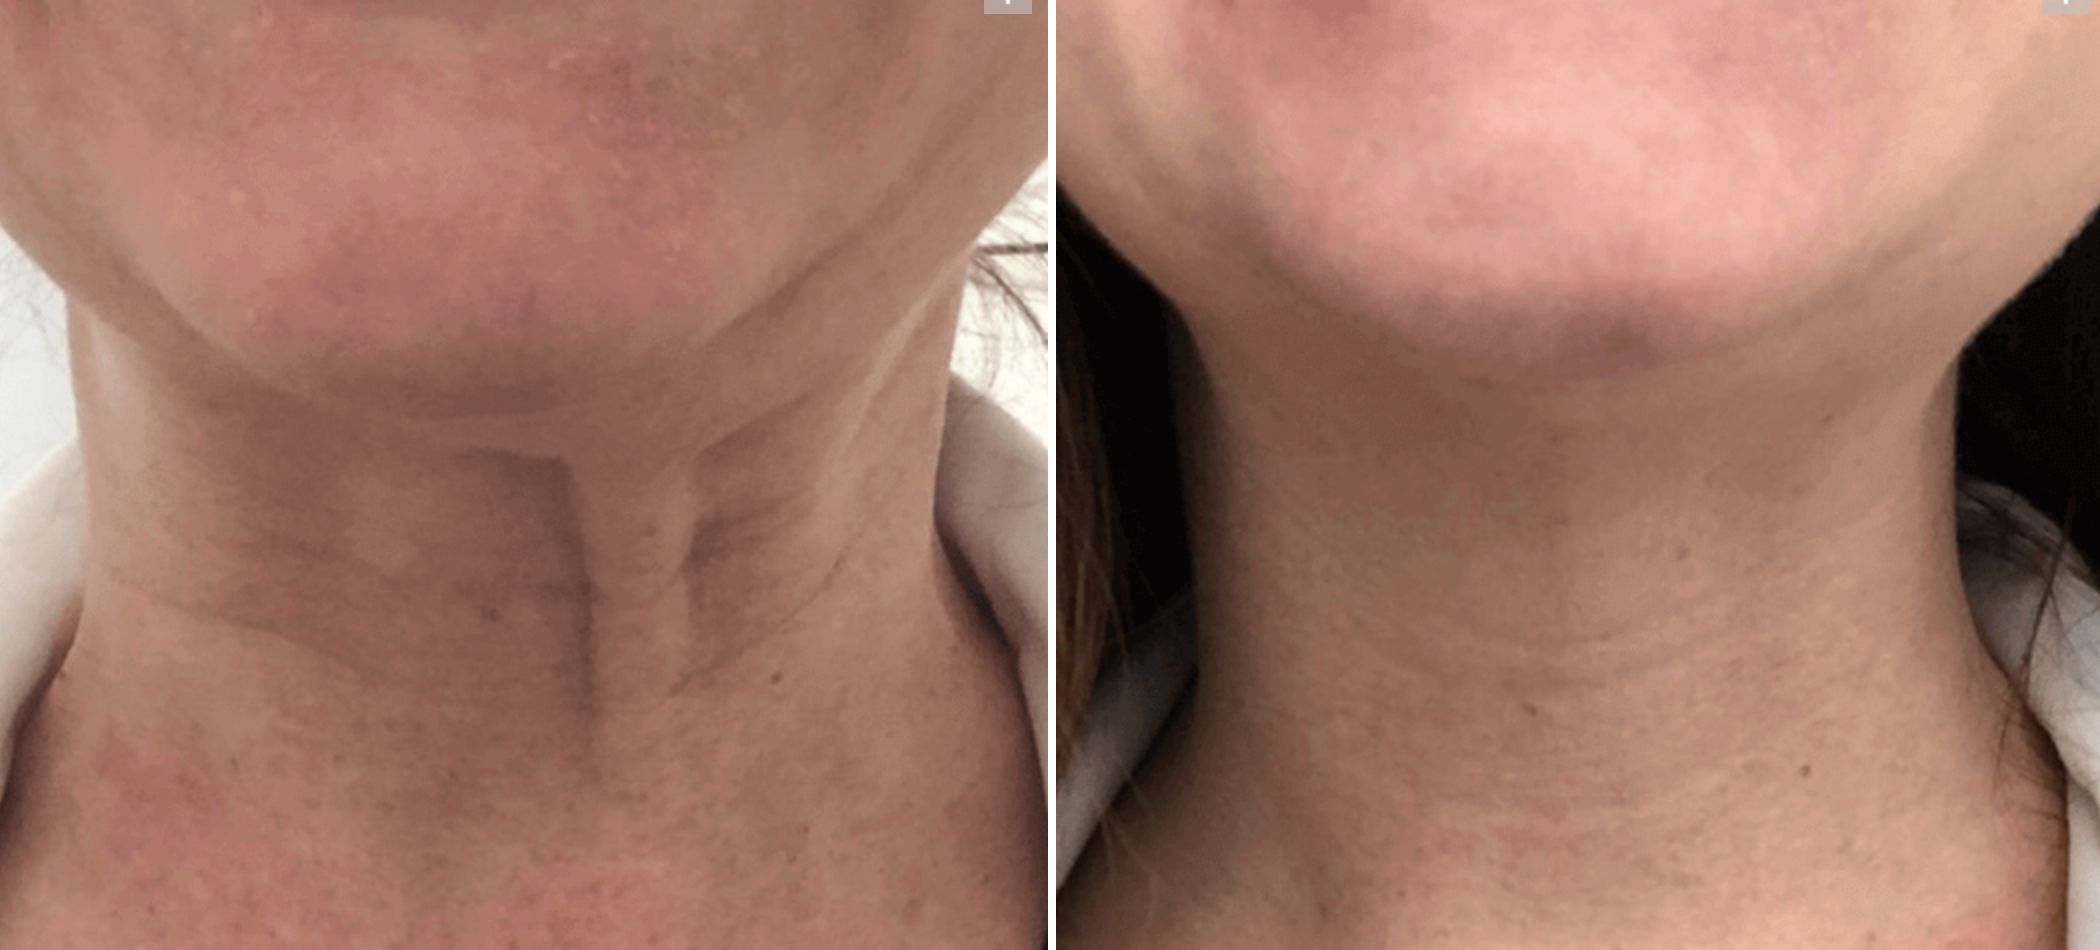 Female patient's neck before and after Botox neck treatment